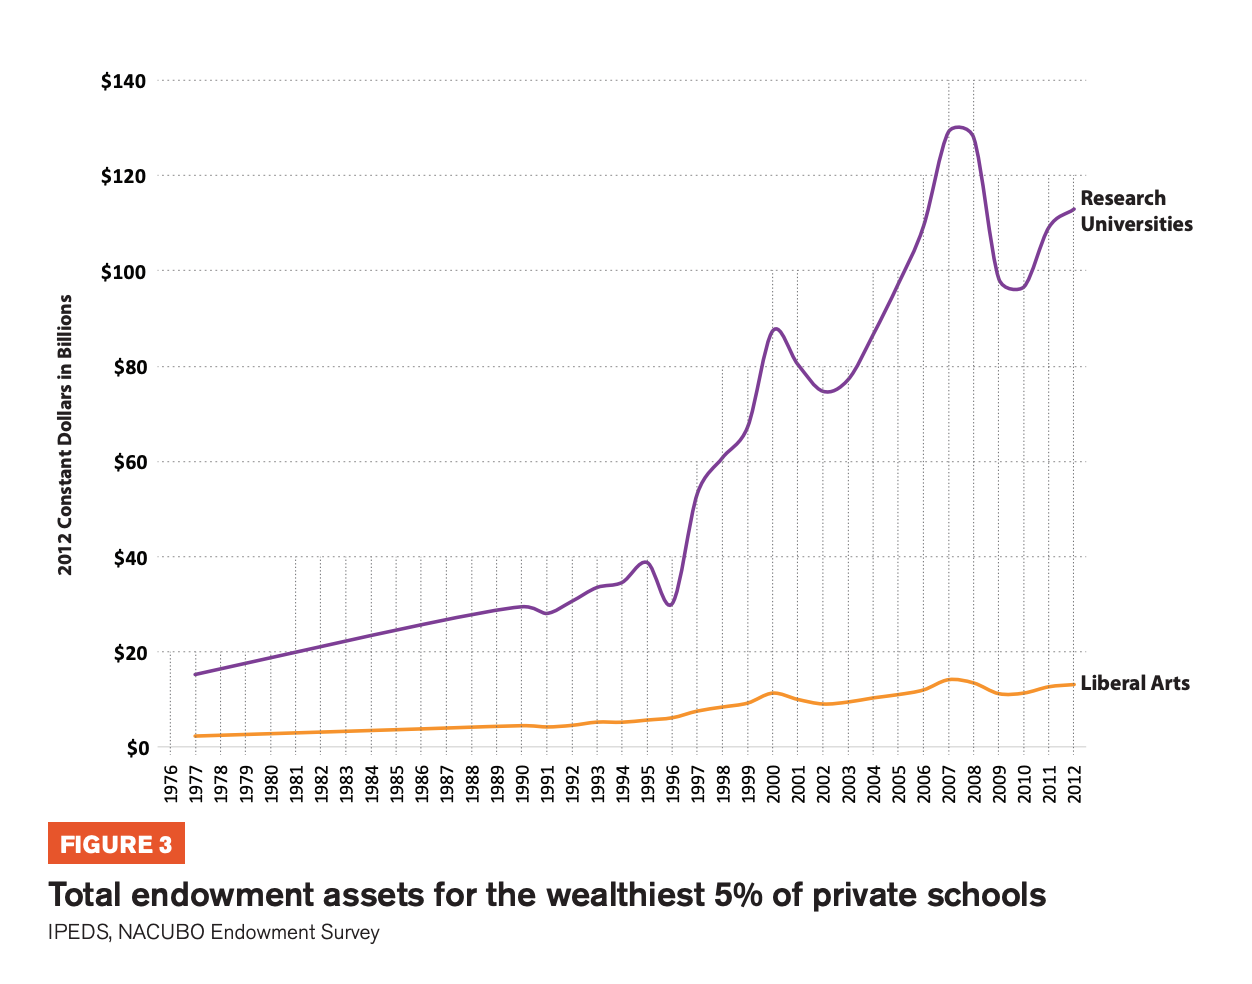 Figure 3 includes a chart showcasing the total endowment assets for the wealthiest 5% of private schools 